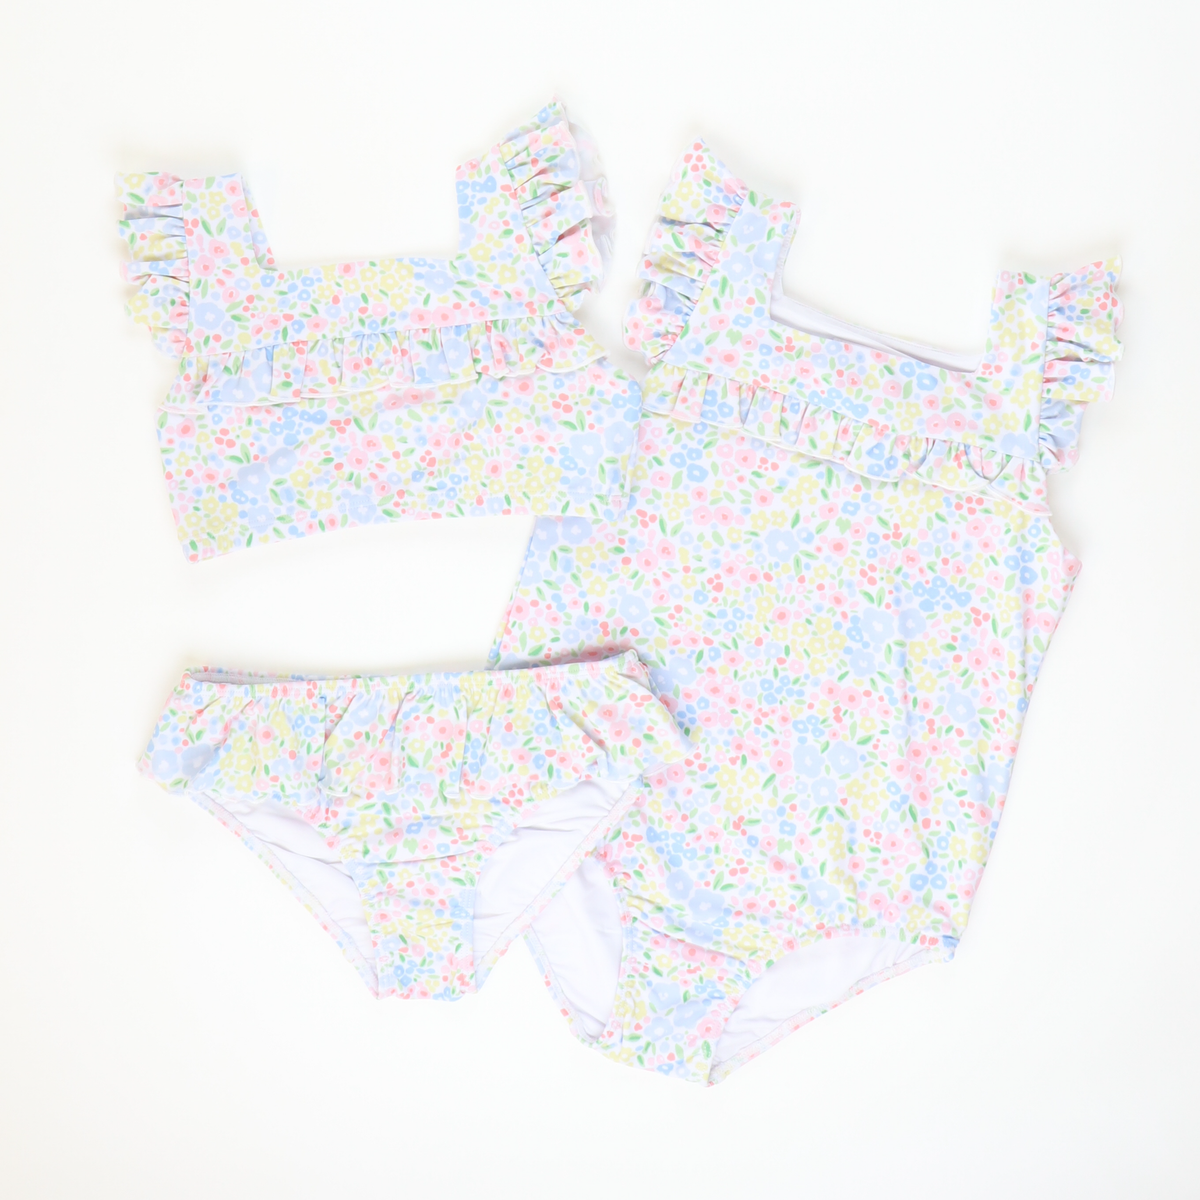 One-Piece Swimsuit - Petite Meadow Floral